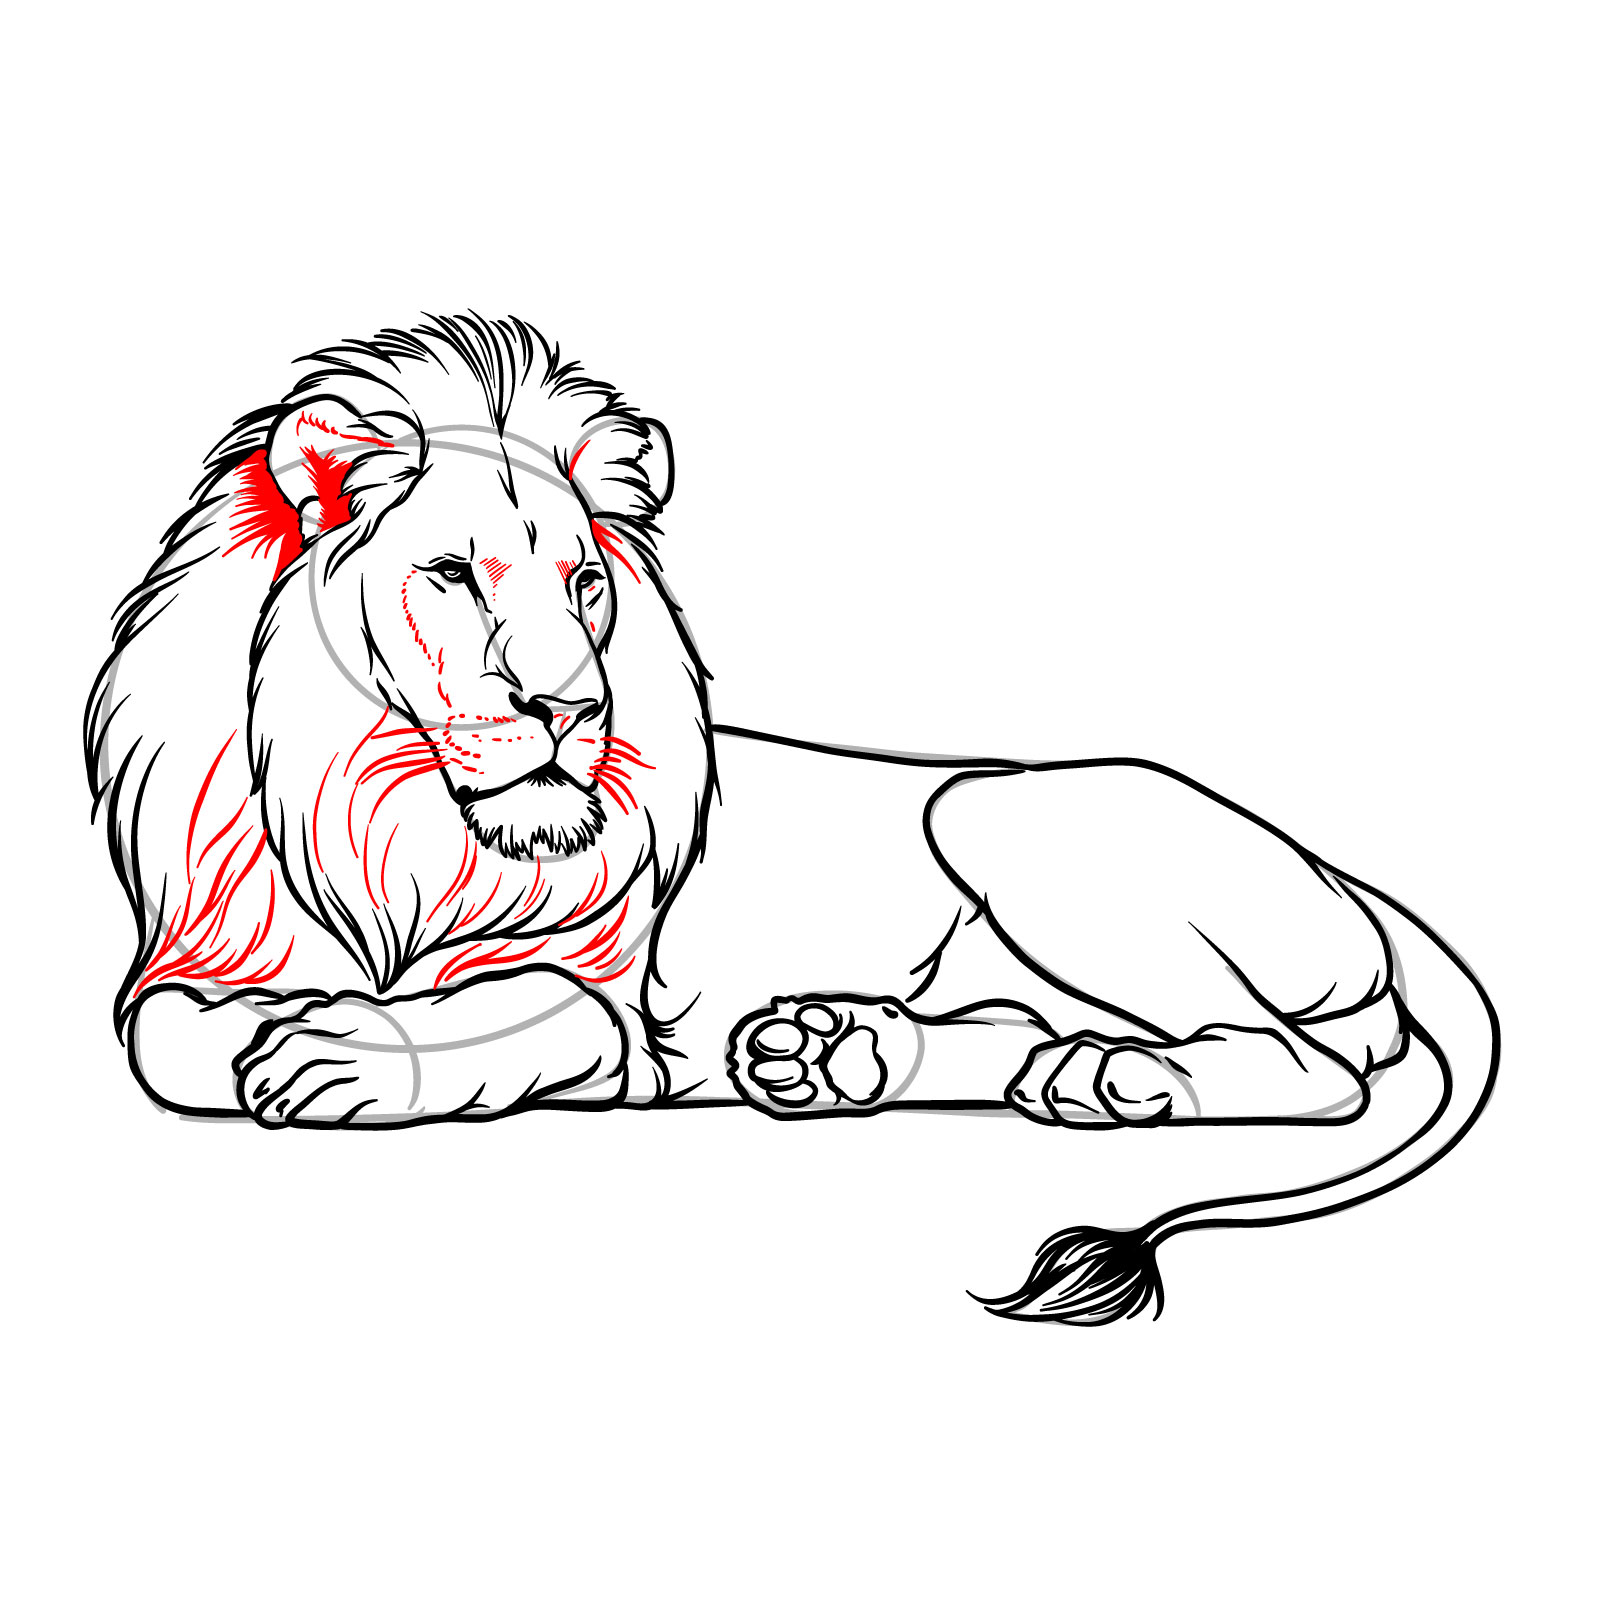 Lying lion drawing - Step 16: Shading ears and adding mane texture